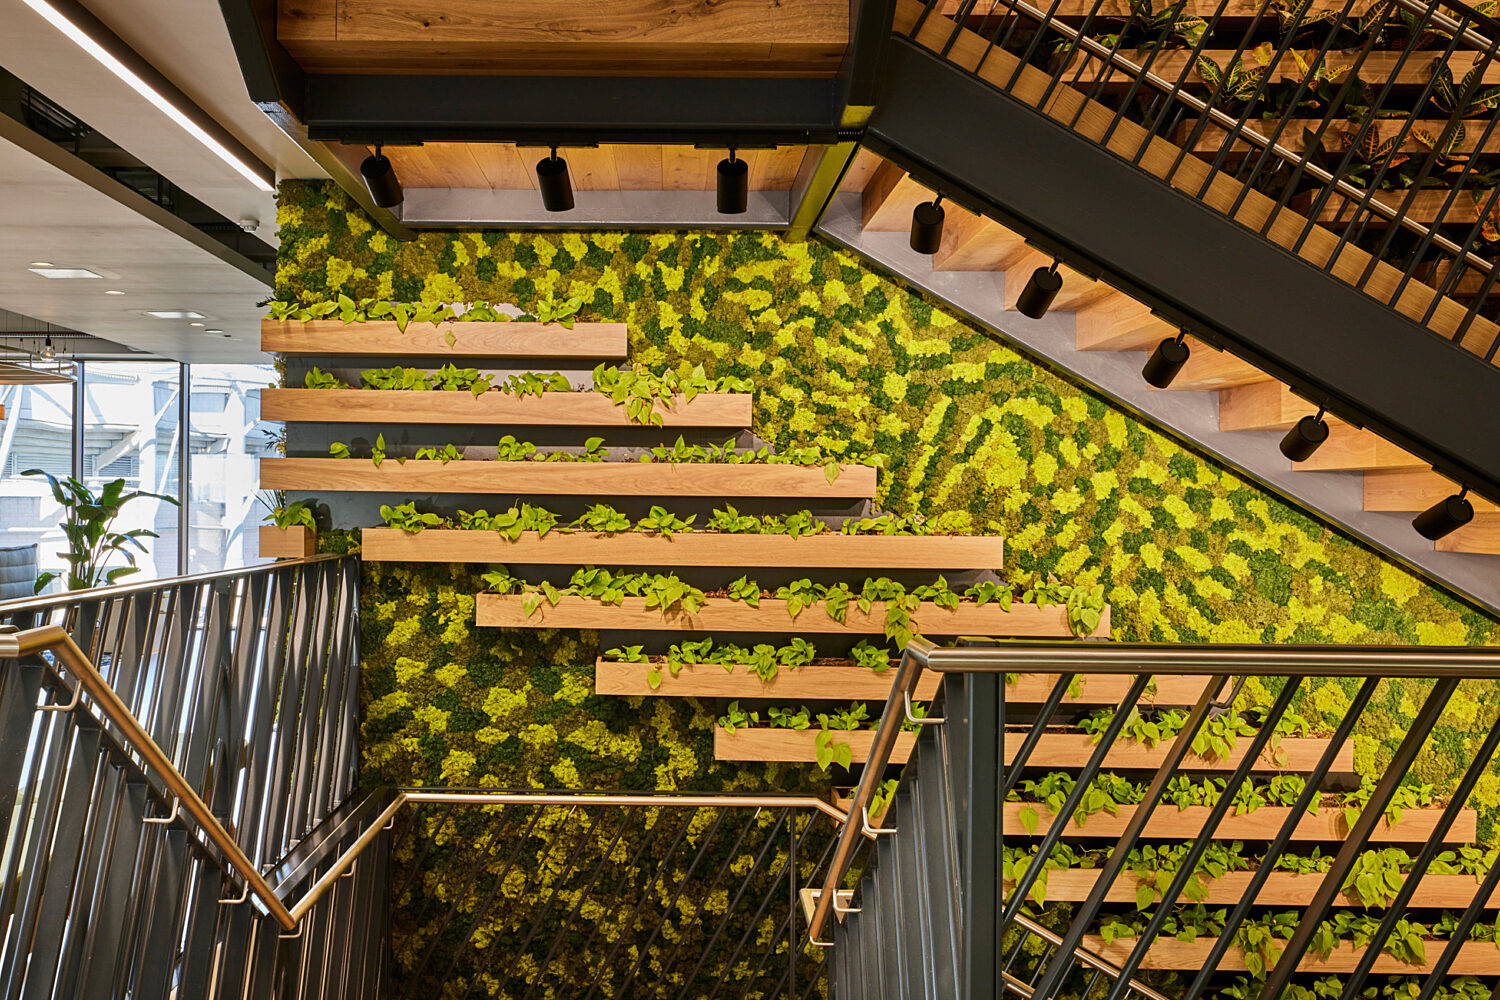 Bespoke joinery and biophilia aligns Newcastle office staircase